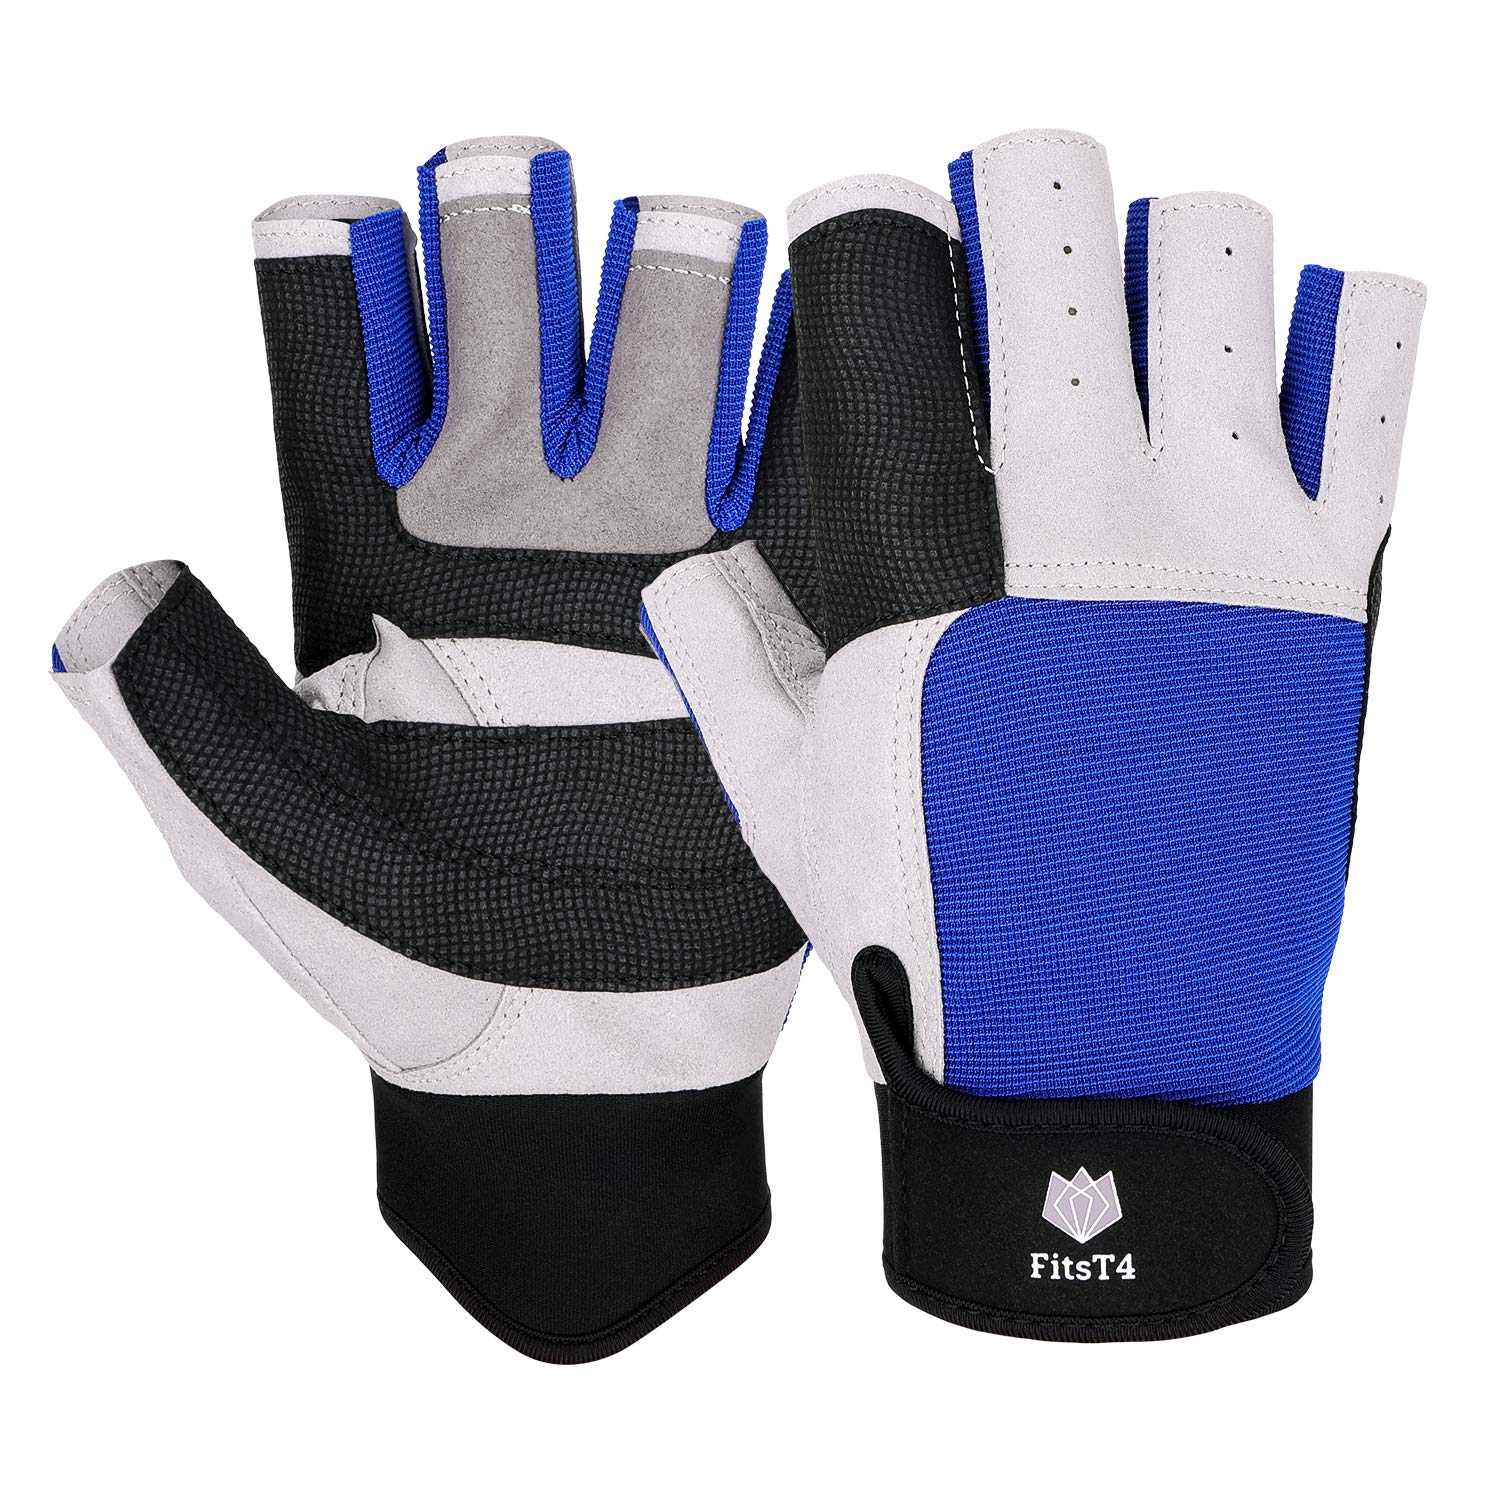 FitsT4 Sailing Gloves 3/4 Finger and Grip Great for Sailing